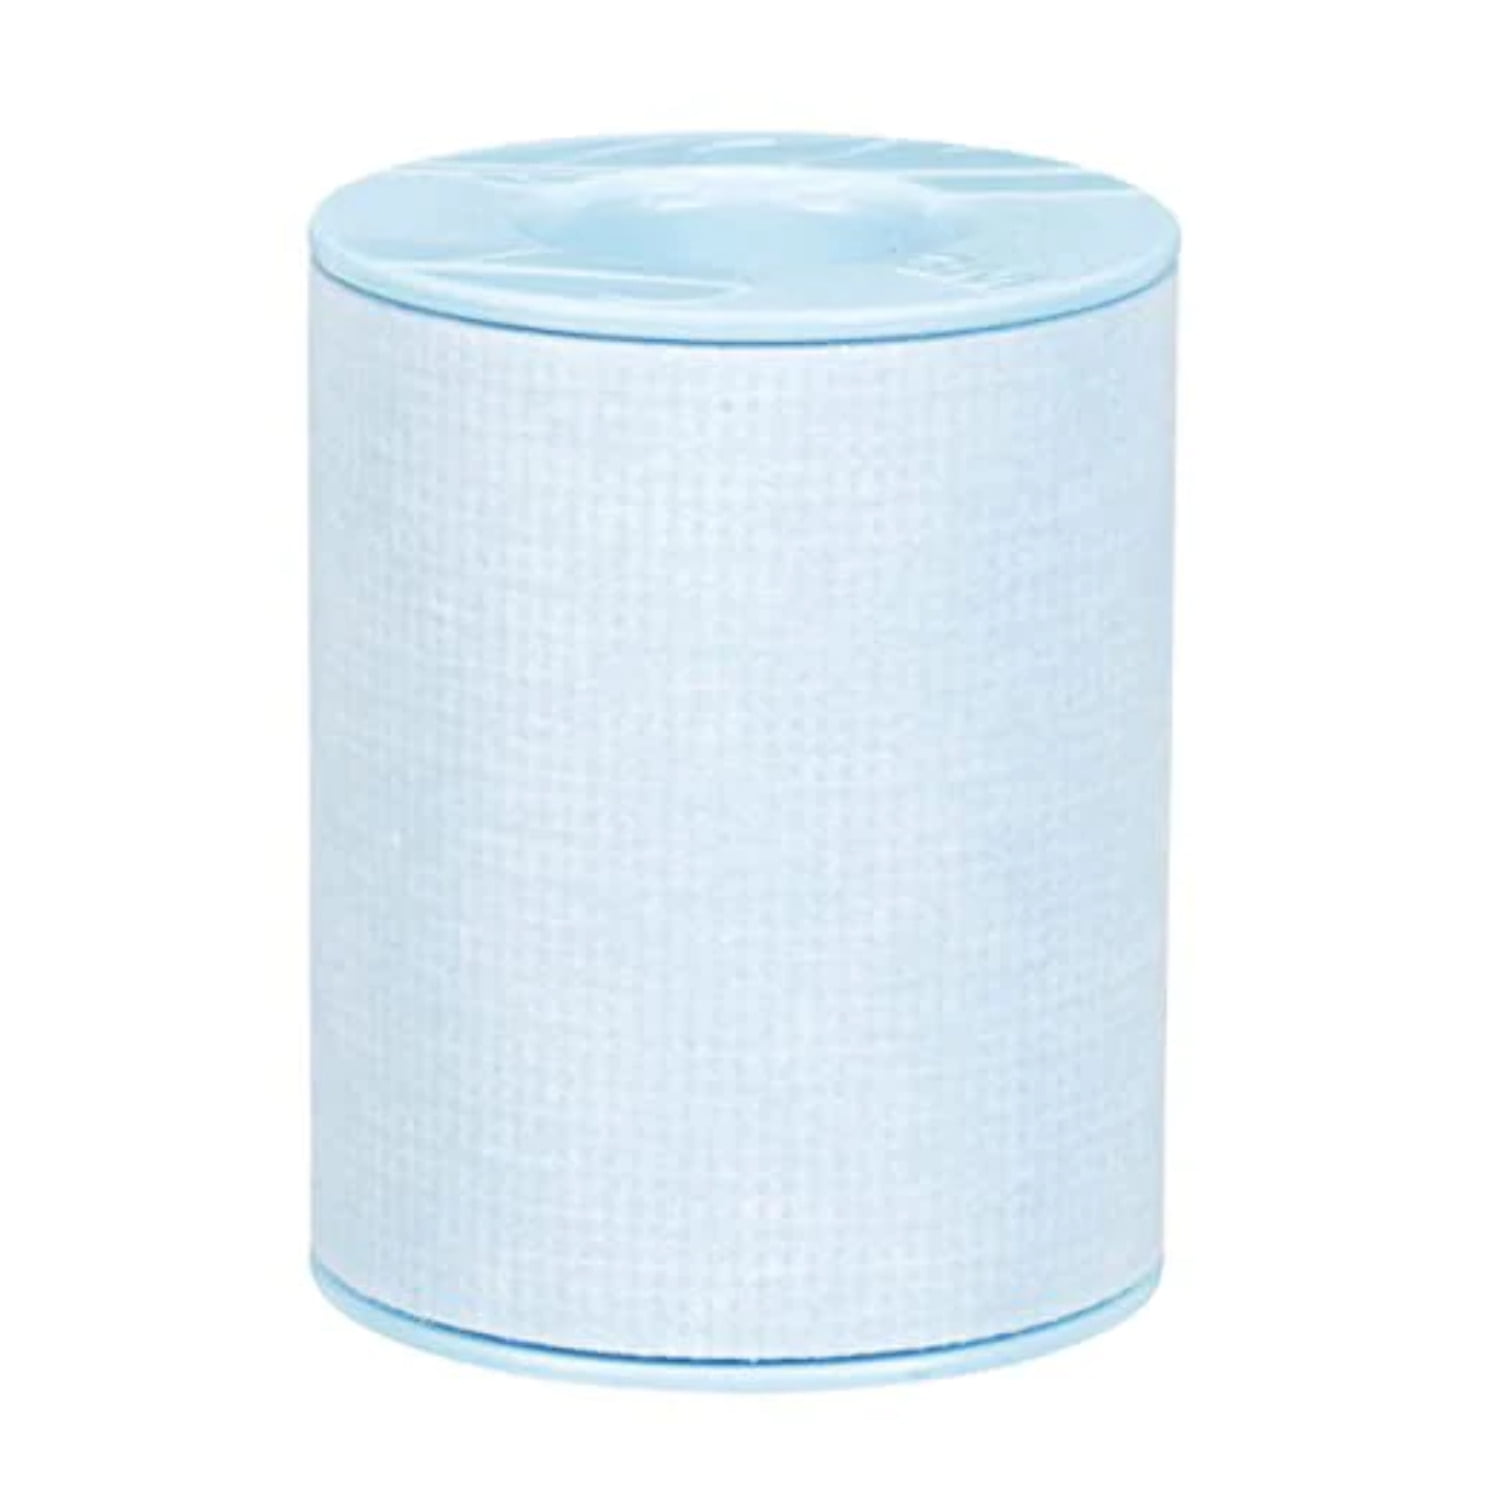 Micropore S Surgical Tape, 5.5 yds. - Medical Monks